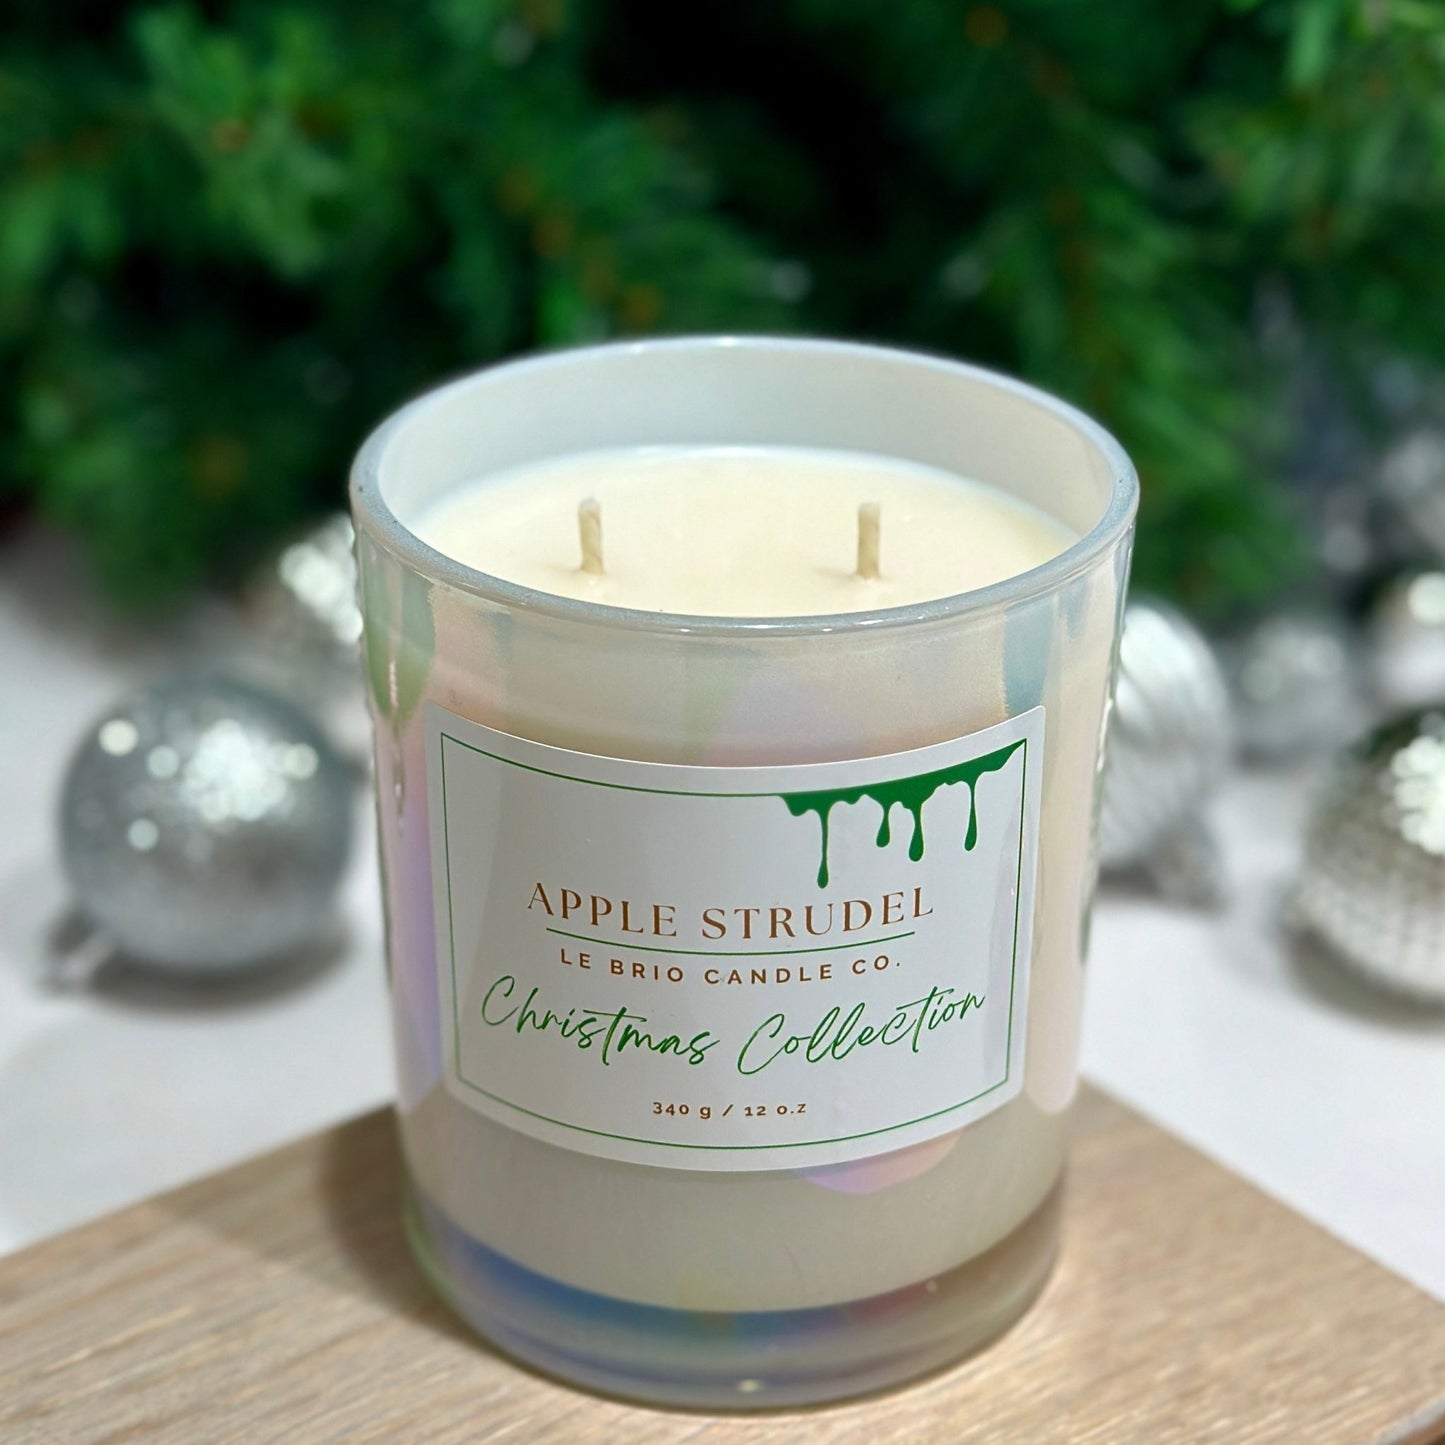 Apple Strudel Soy Candle - Le Brio Candle